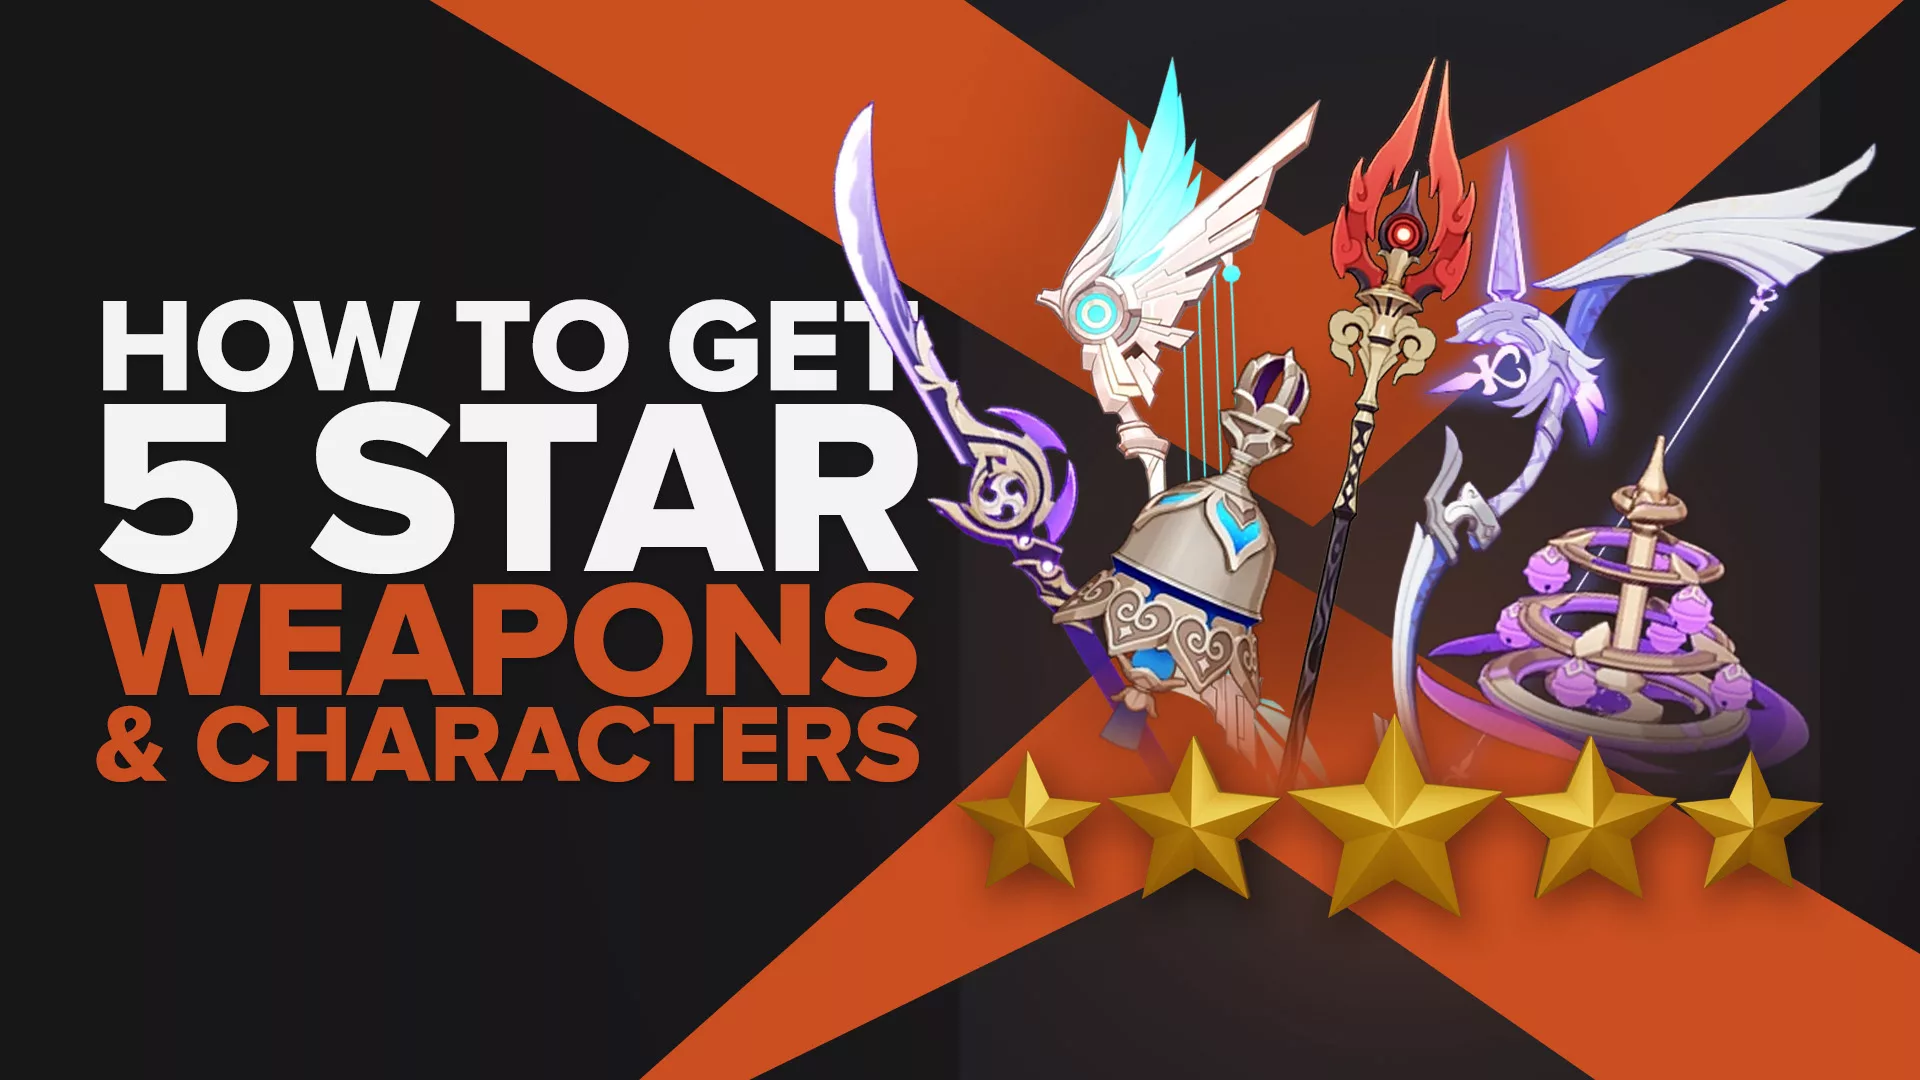 How To Get Five-Star Character And Weapons in Genshin Impact? (A Simple Guide To Wishing)